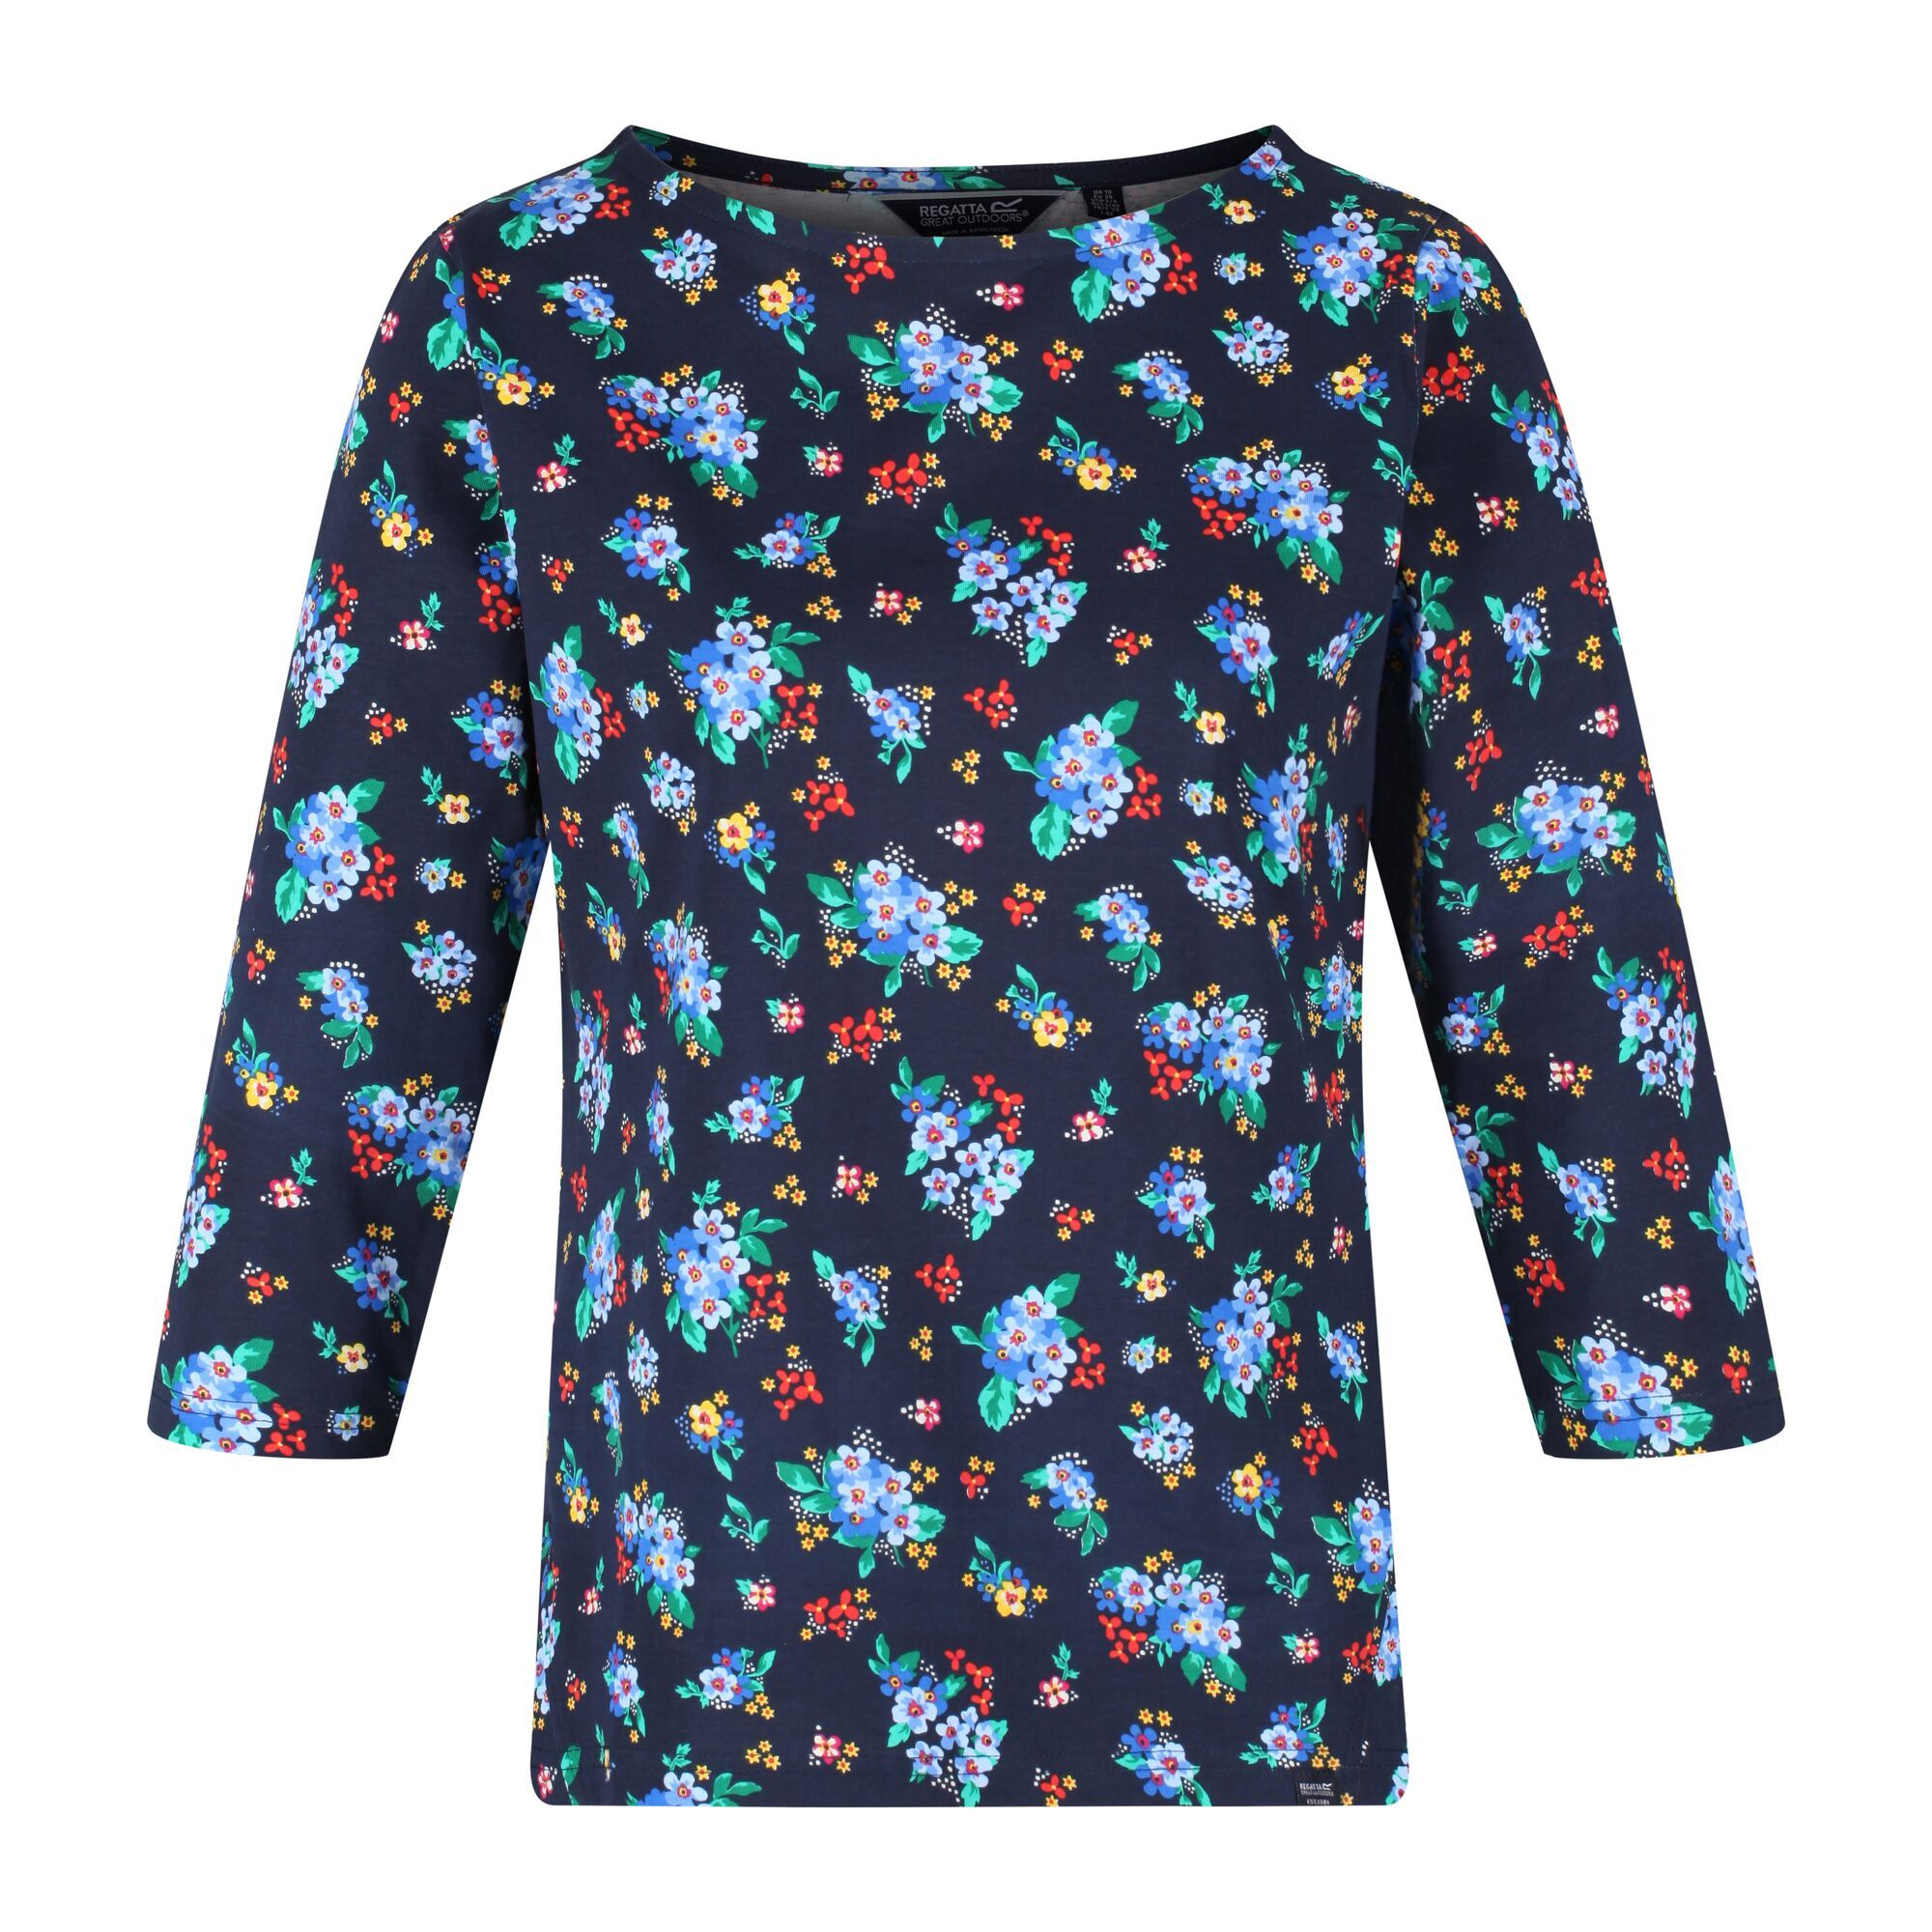 Women's Polina Printed Long Sleeved T-Shirt Navy Floral